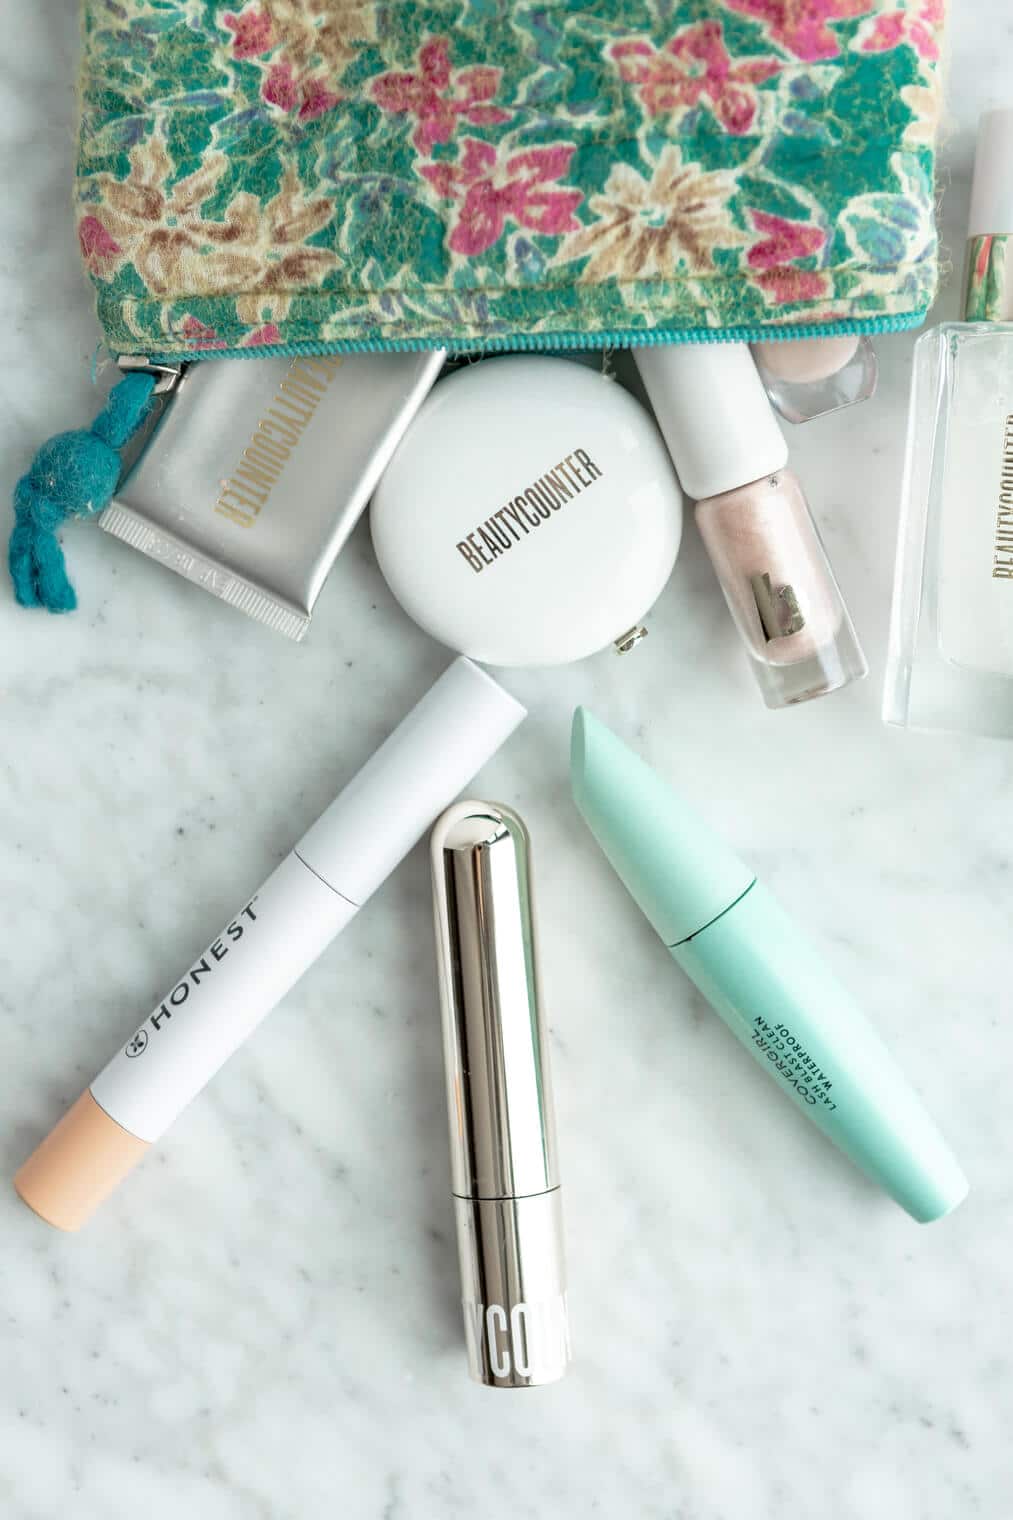 Top down view of three mascara tubes on a gray and white marble surface with a turquoise floral make up bag.